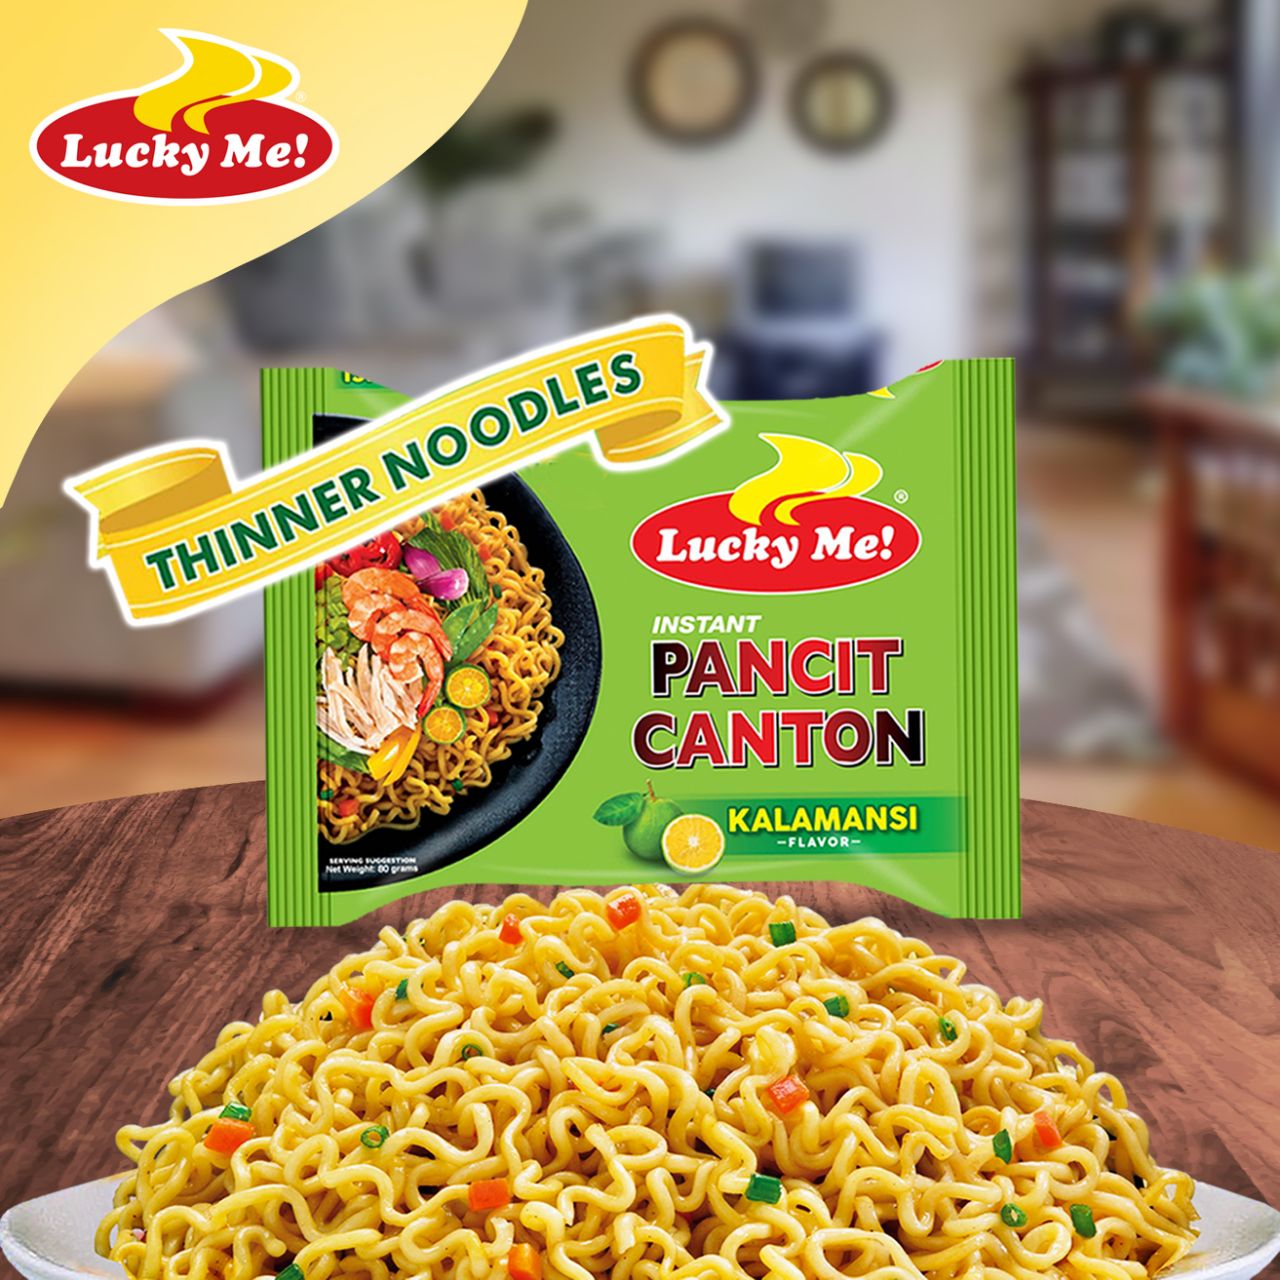 Henry Soesanto: How An Indonesian Turned 'Lucky Me! Pancit Canton' Into A Well Loved Pinoy Food